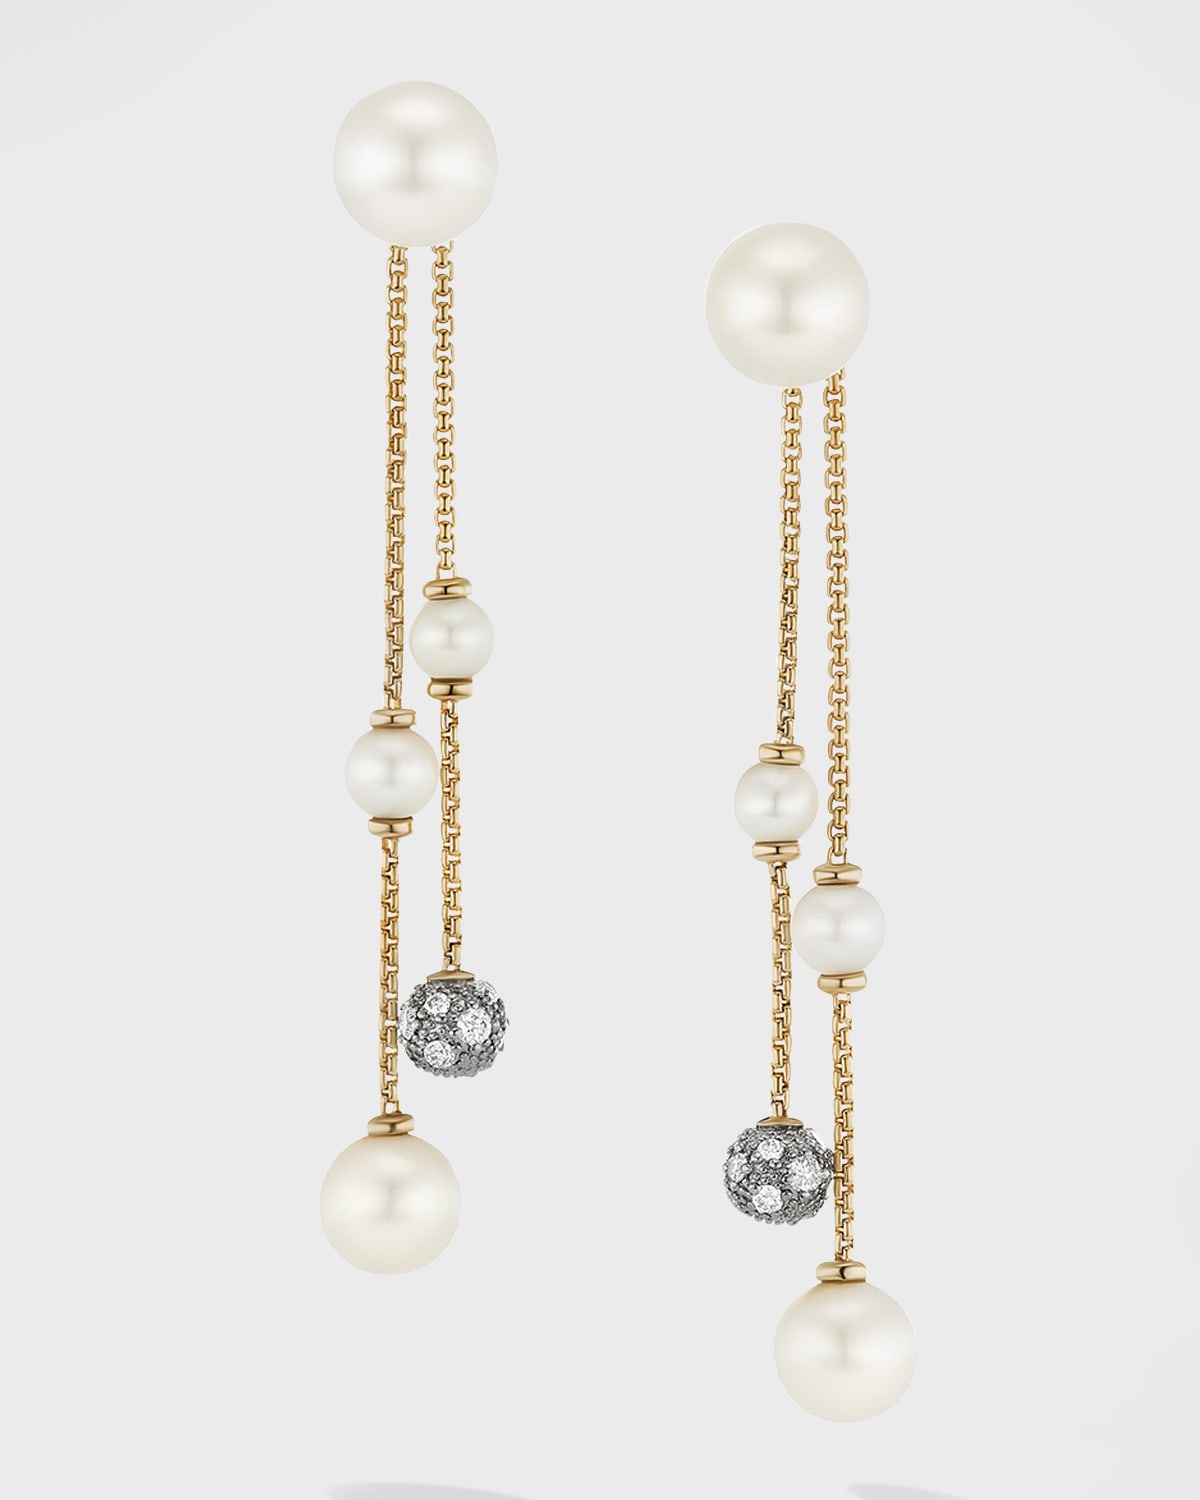 Shop David Yurman Pearl And Pave Two Row Drop Earrings With Diamonds In 18k Gold, 8mm, 2.1"l In 60 Multi-colored